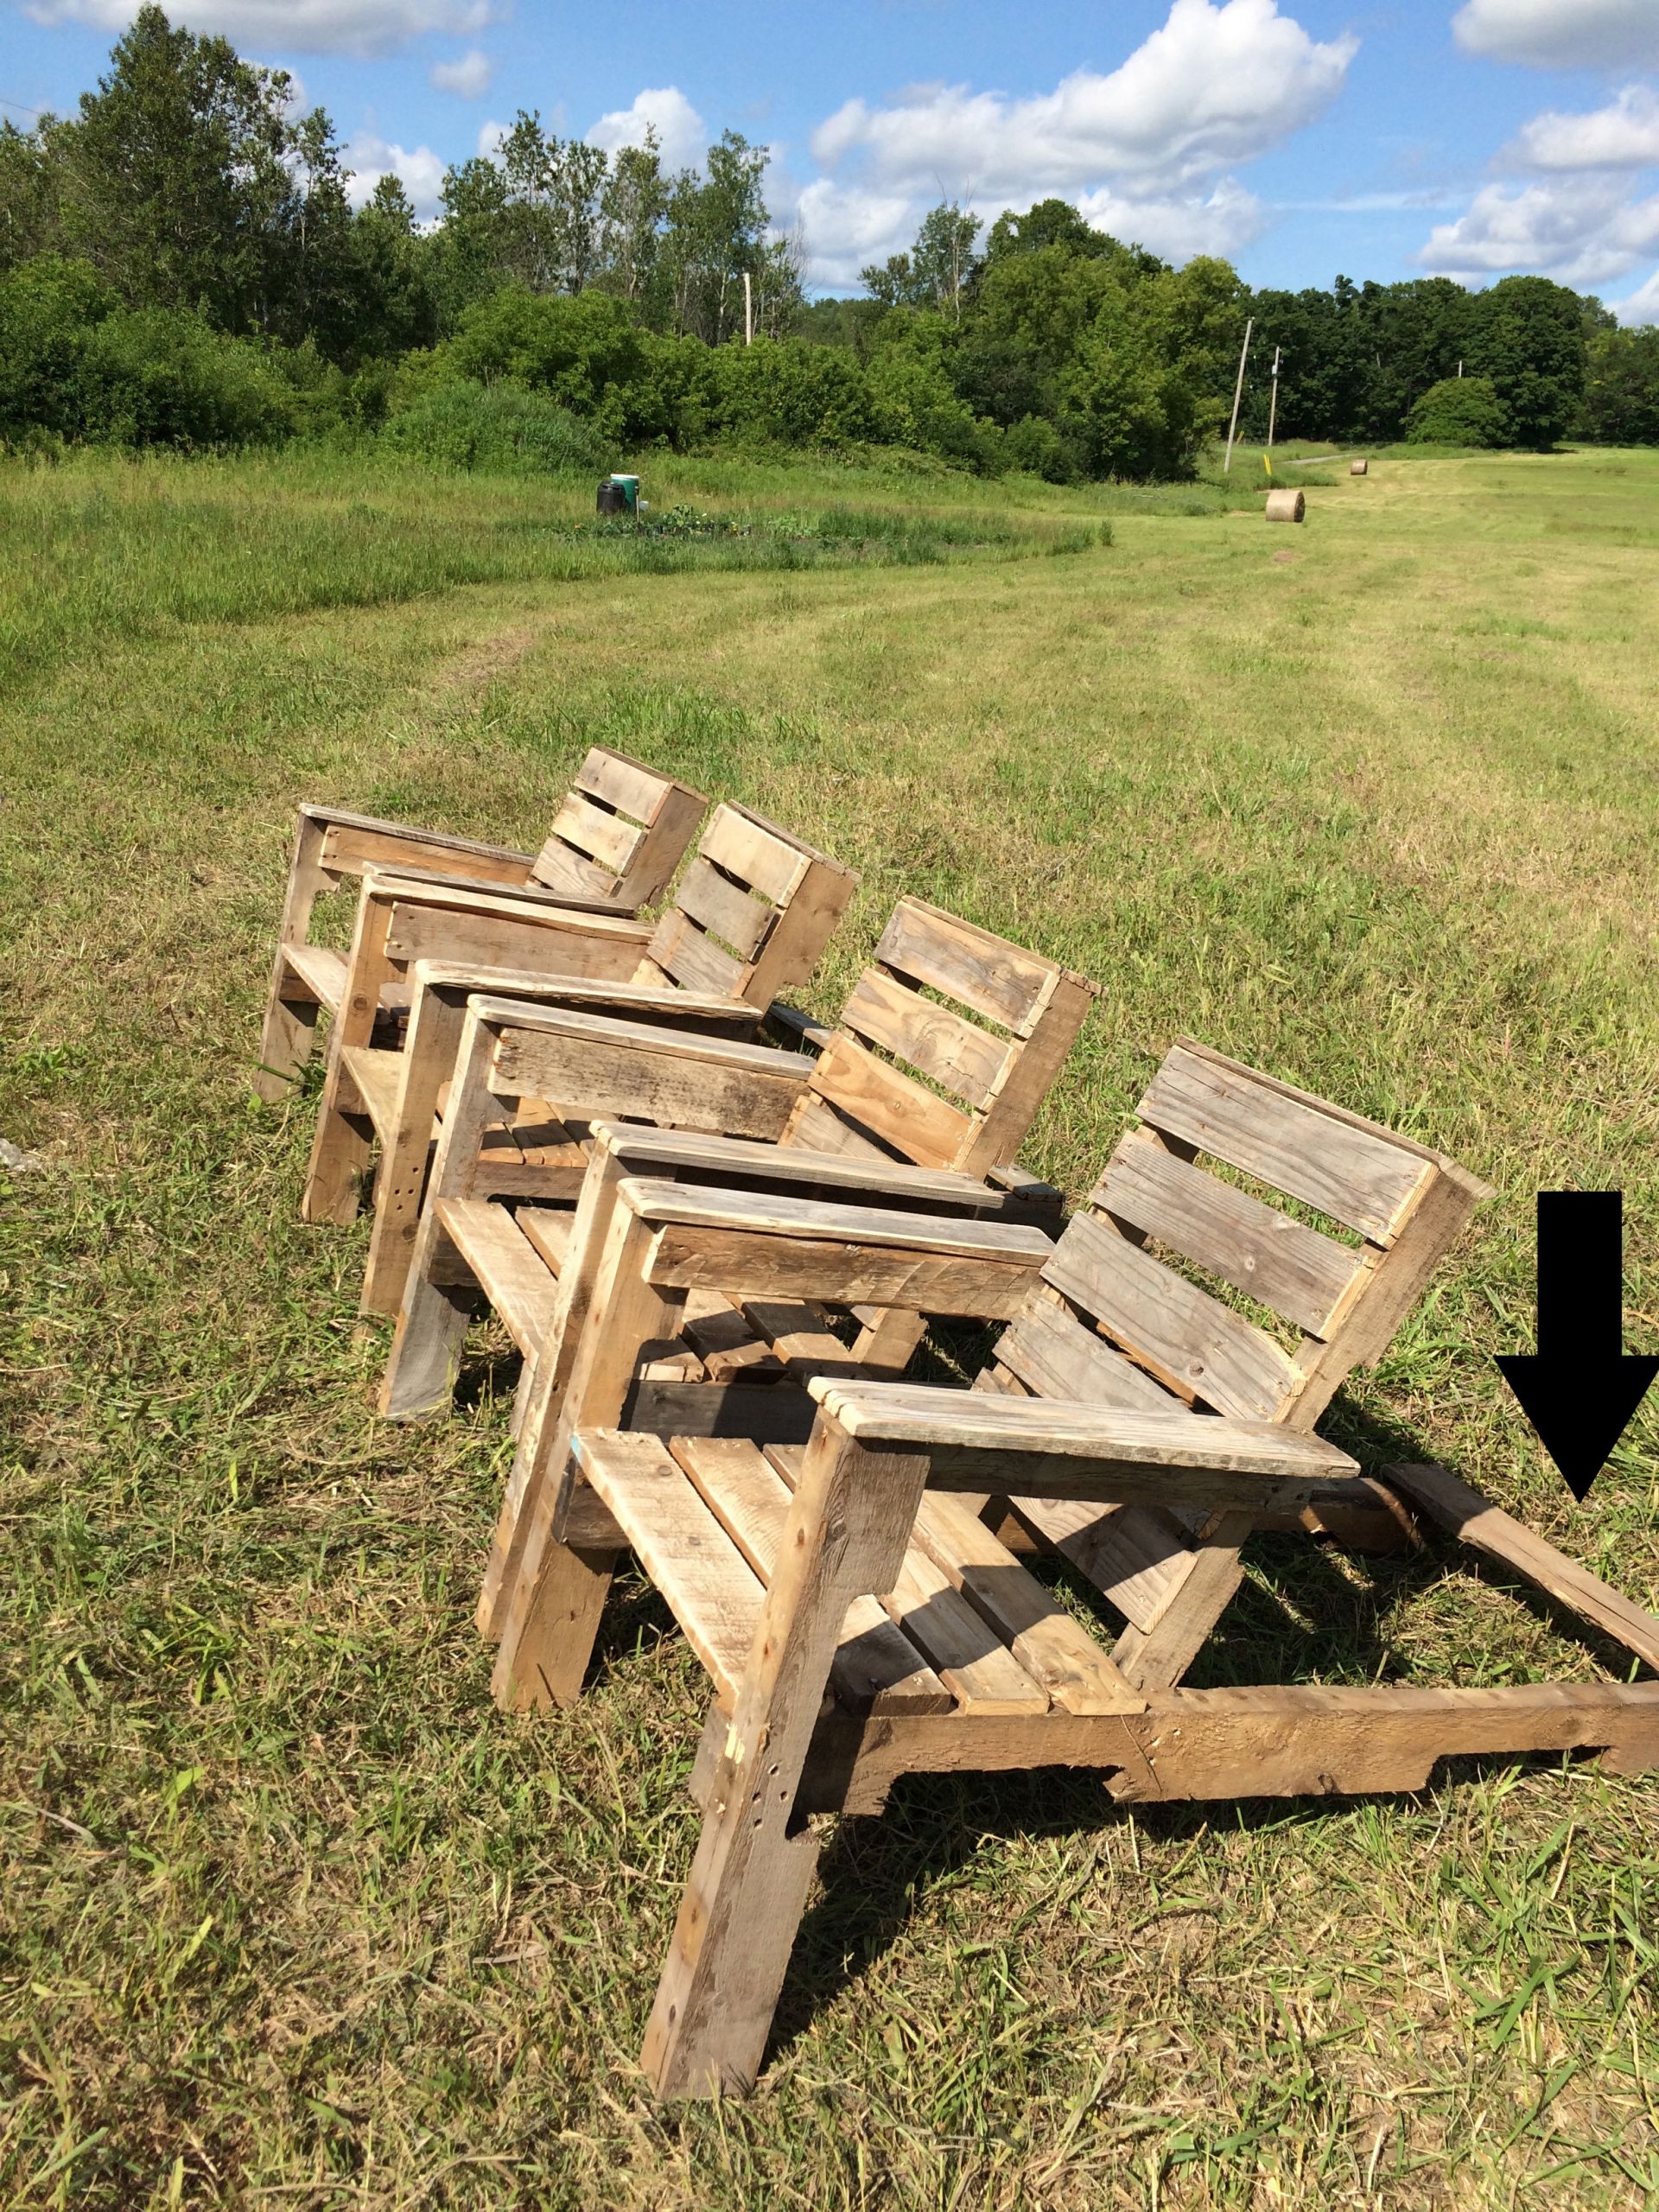 DIY Wood Chairs
 Free DIY Shipping Pallet Chair Plans